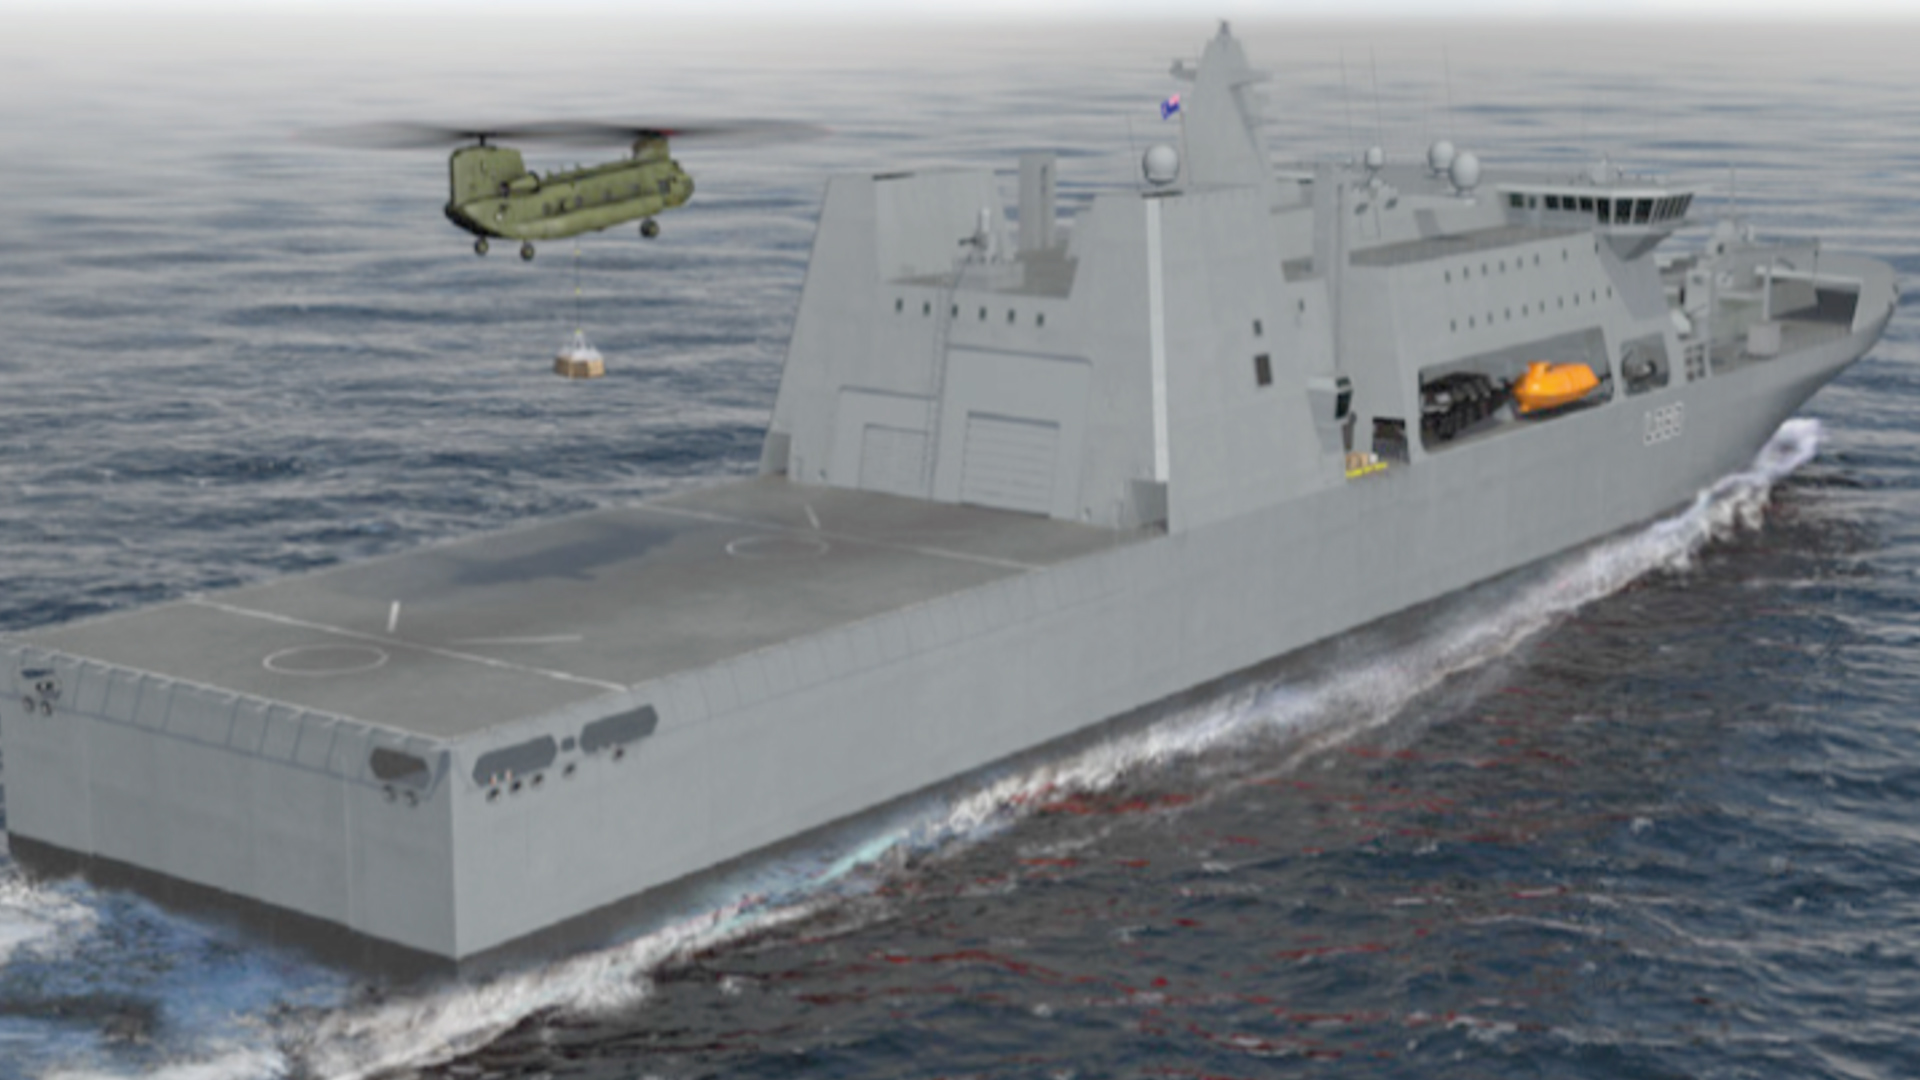 BMT’s updated ELLIDA multi-role logistics ship up for SEA 2200